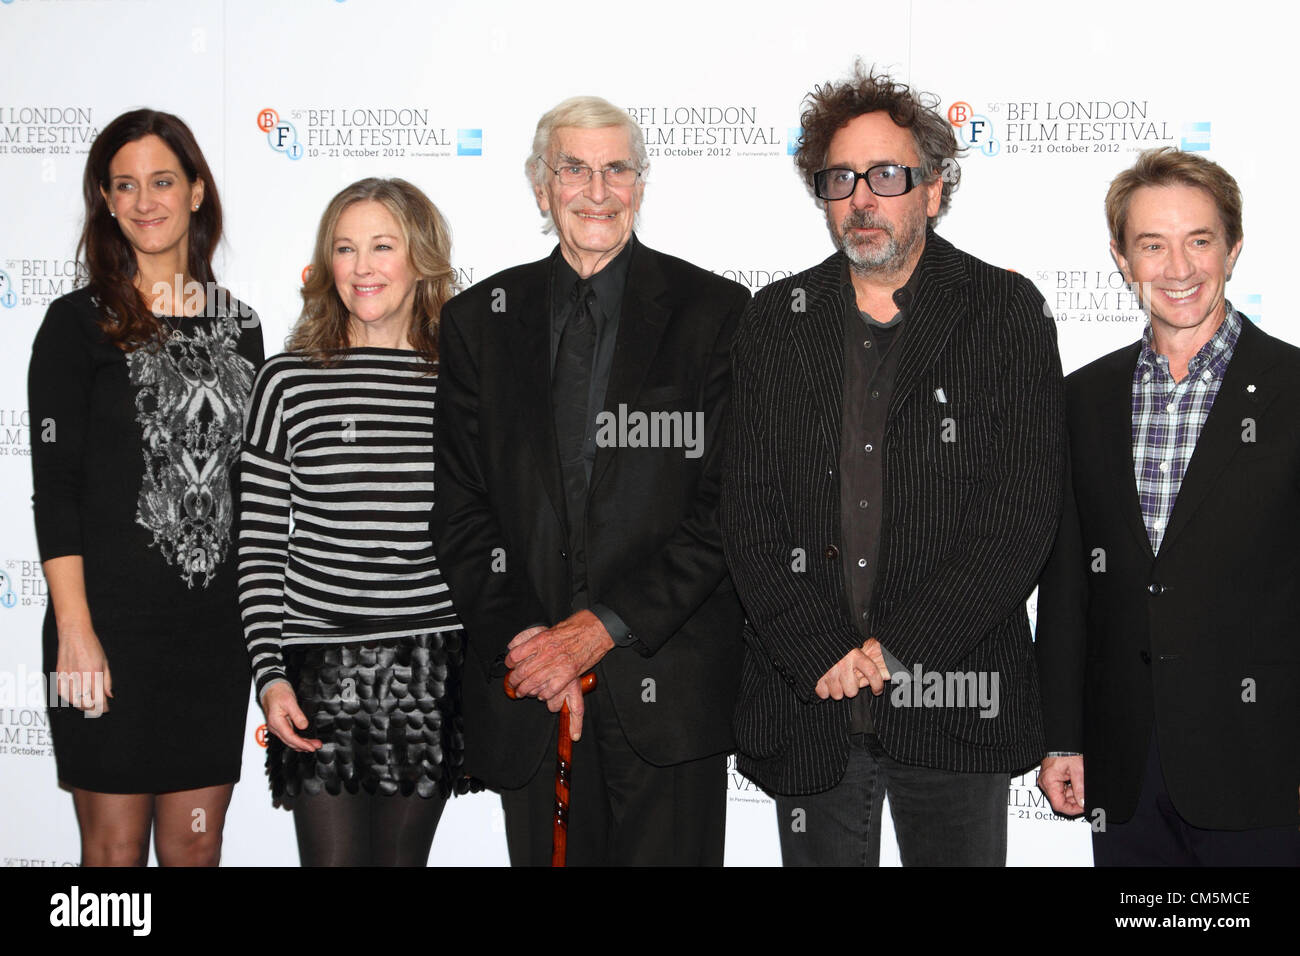 London, UK. 10th October 2012. Director Tim Burton, Producer Allison Abbate  and Voice Cast members Catherine O'Hara, Martin Landau and Martin Short at  the BFI London Film Festival 'Frankenweenie 3D' photocall at